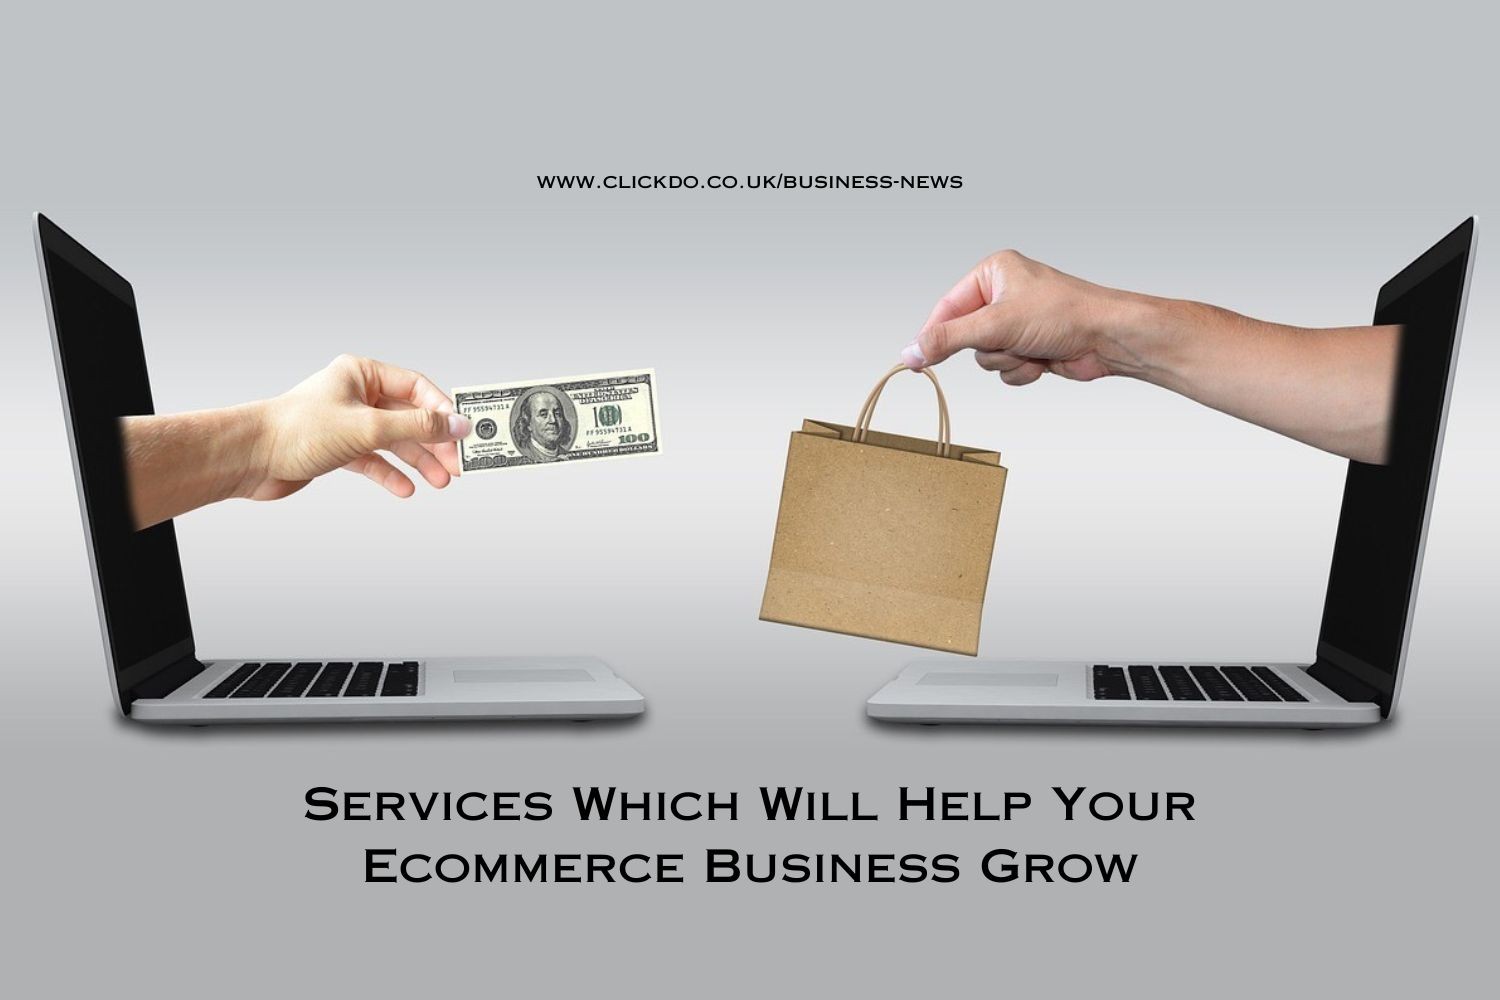 services-help-ecommerce-business-grow